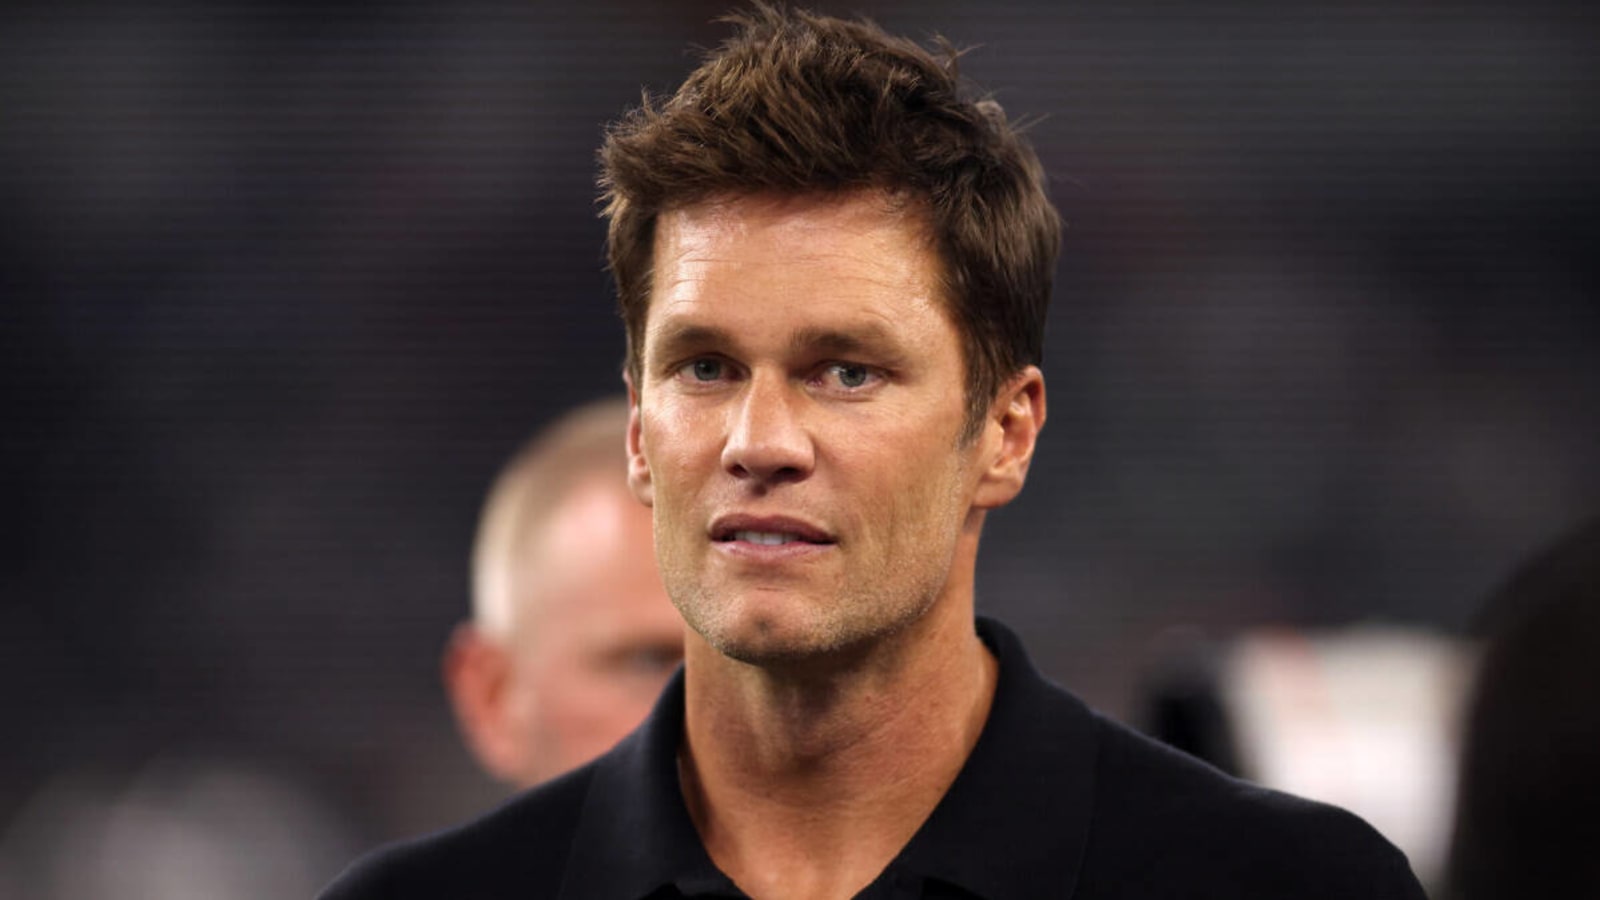 Tom Brady gave Colts fans another reason to dislike him